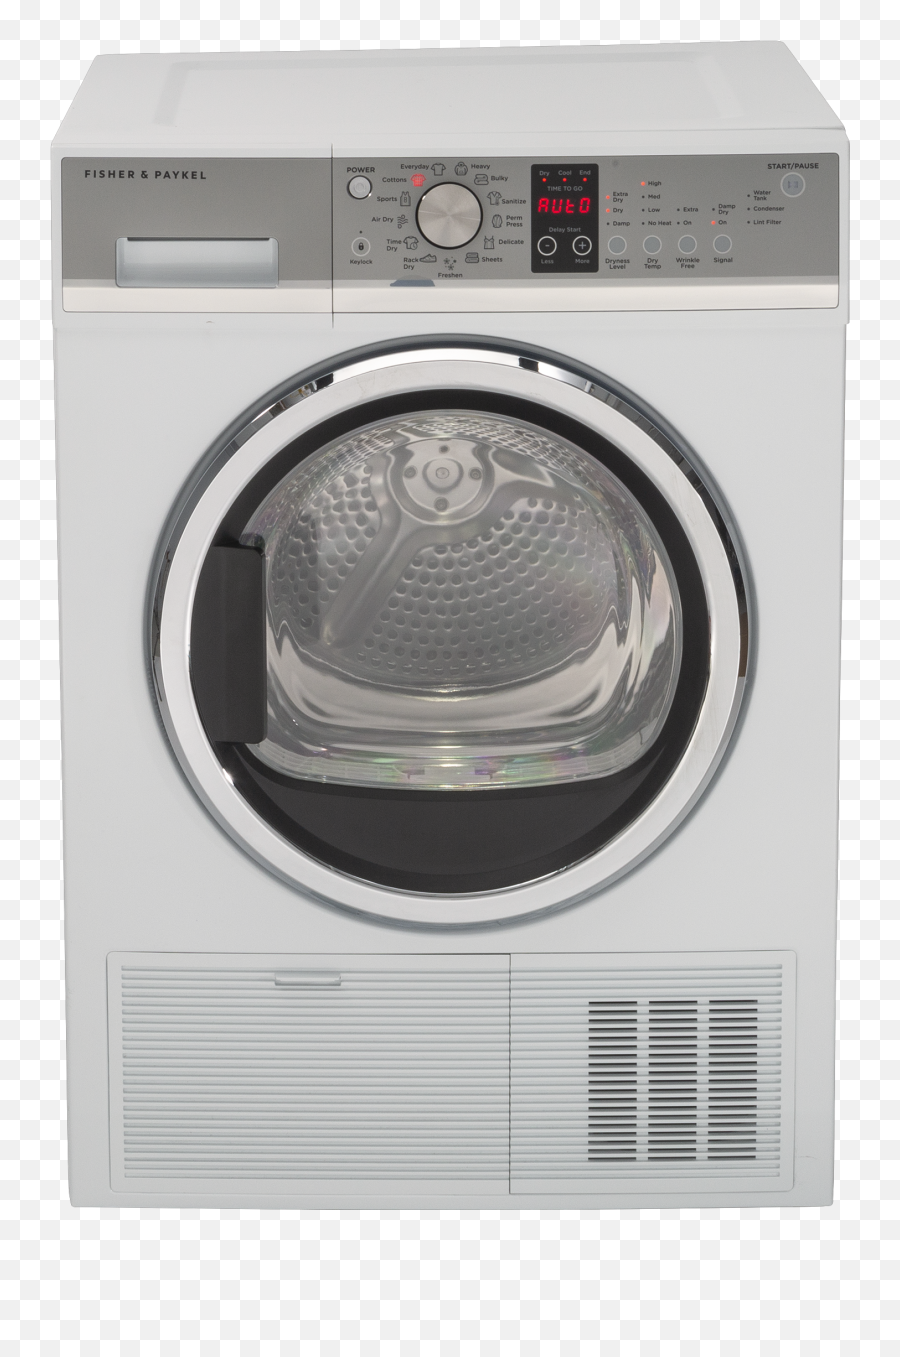 Fisher U0026 Paykel De4024p1 Clothes Dryer - Consumer Reports Washing Machine Png,How To Disassemble Fisher Paykel Icon